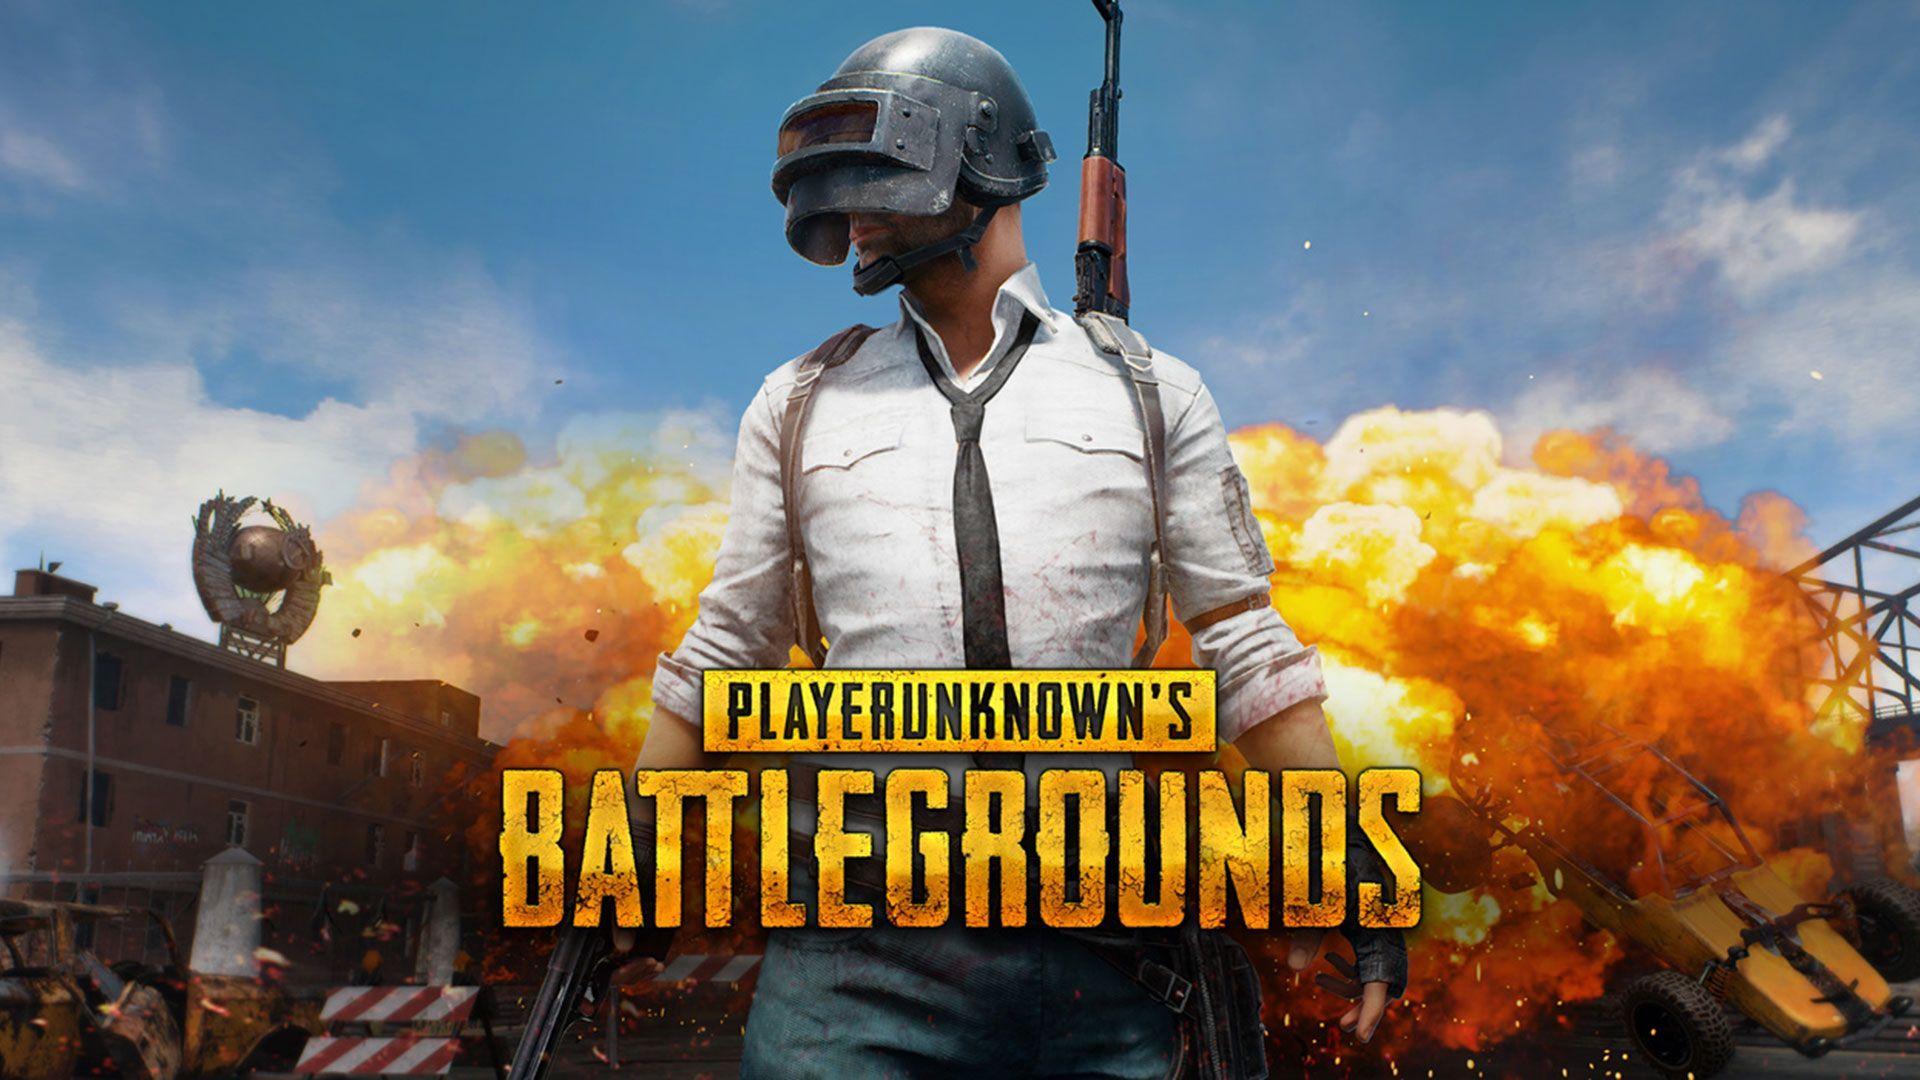 20 Best PUBG Wallpapers In HD Download For PC And Mobile  Jungle wallpaper  Android one 4k gaming wallpaper